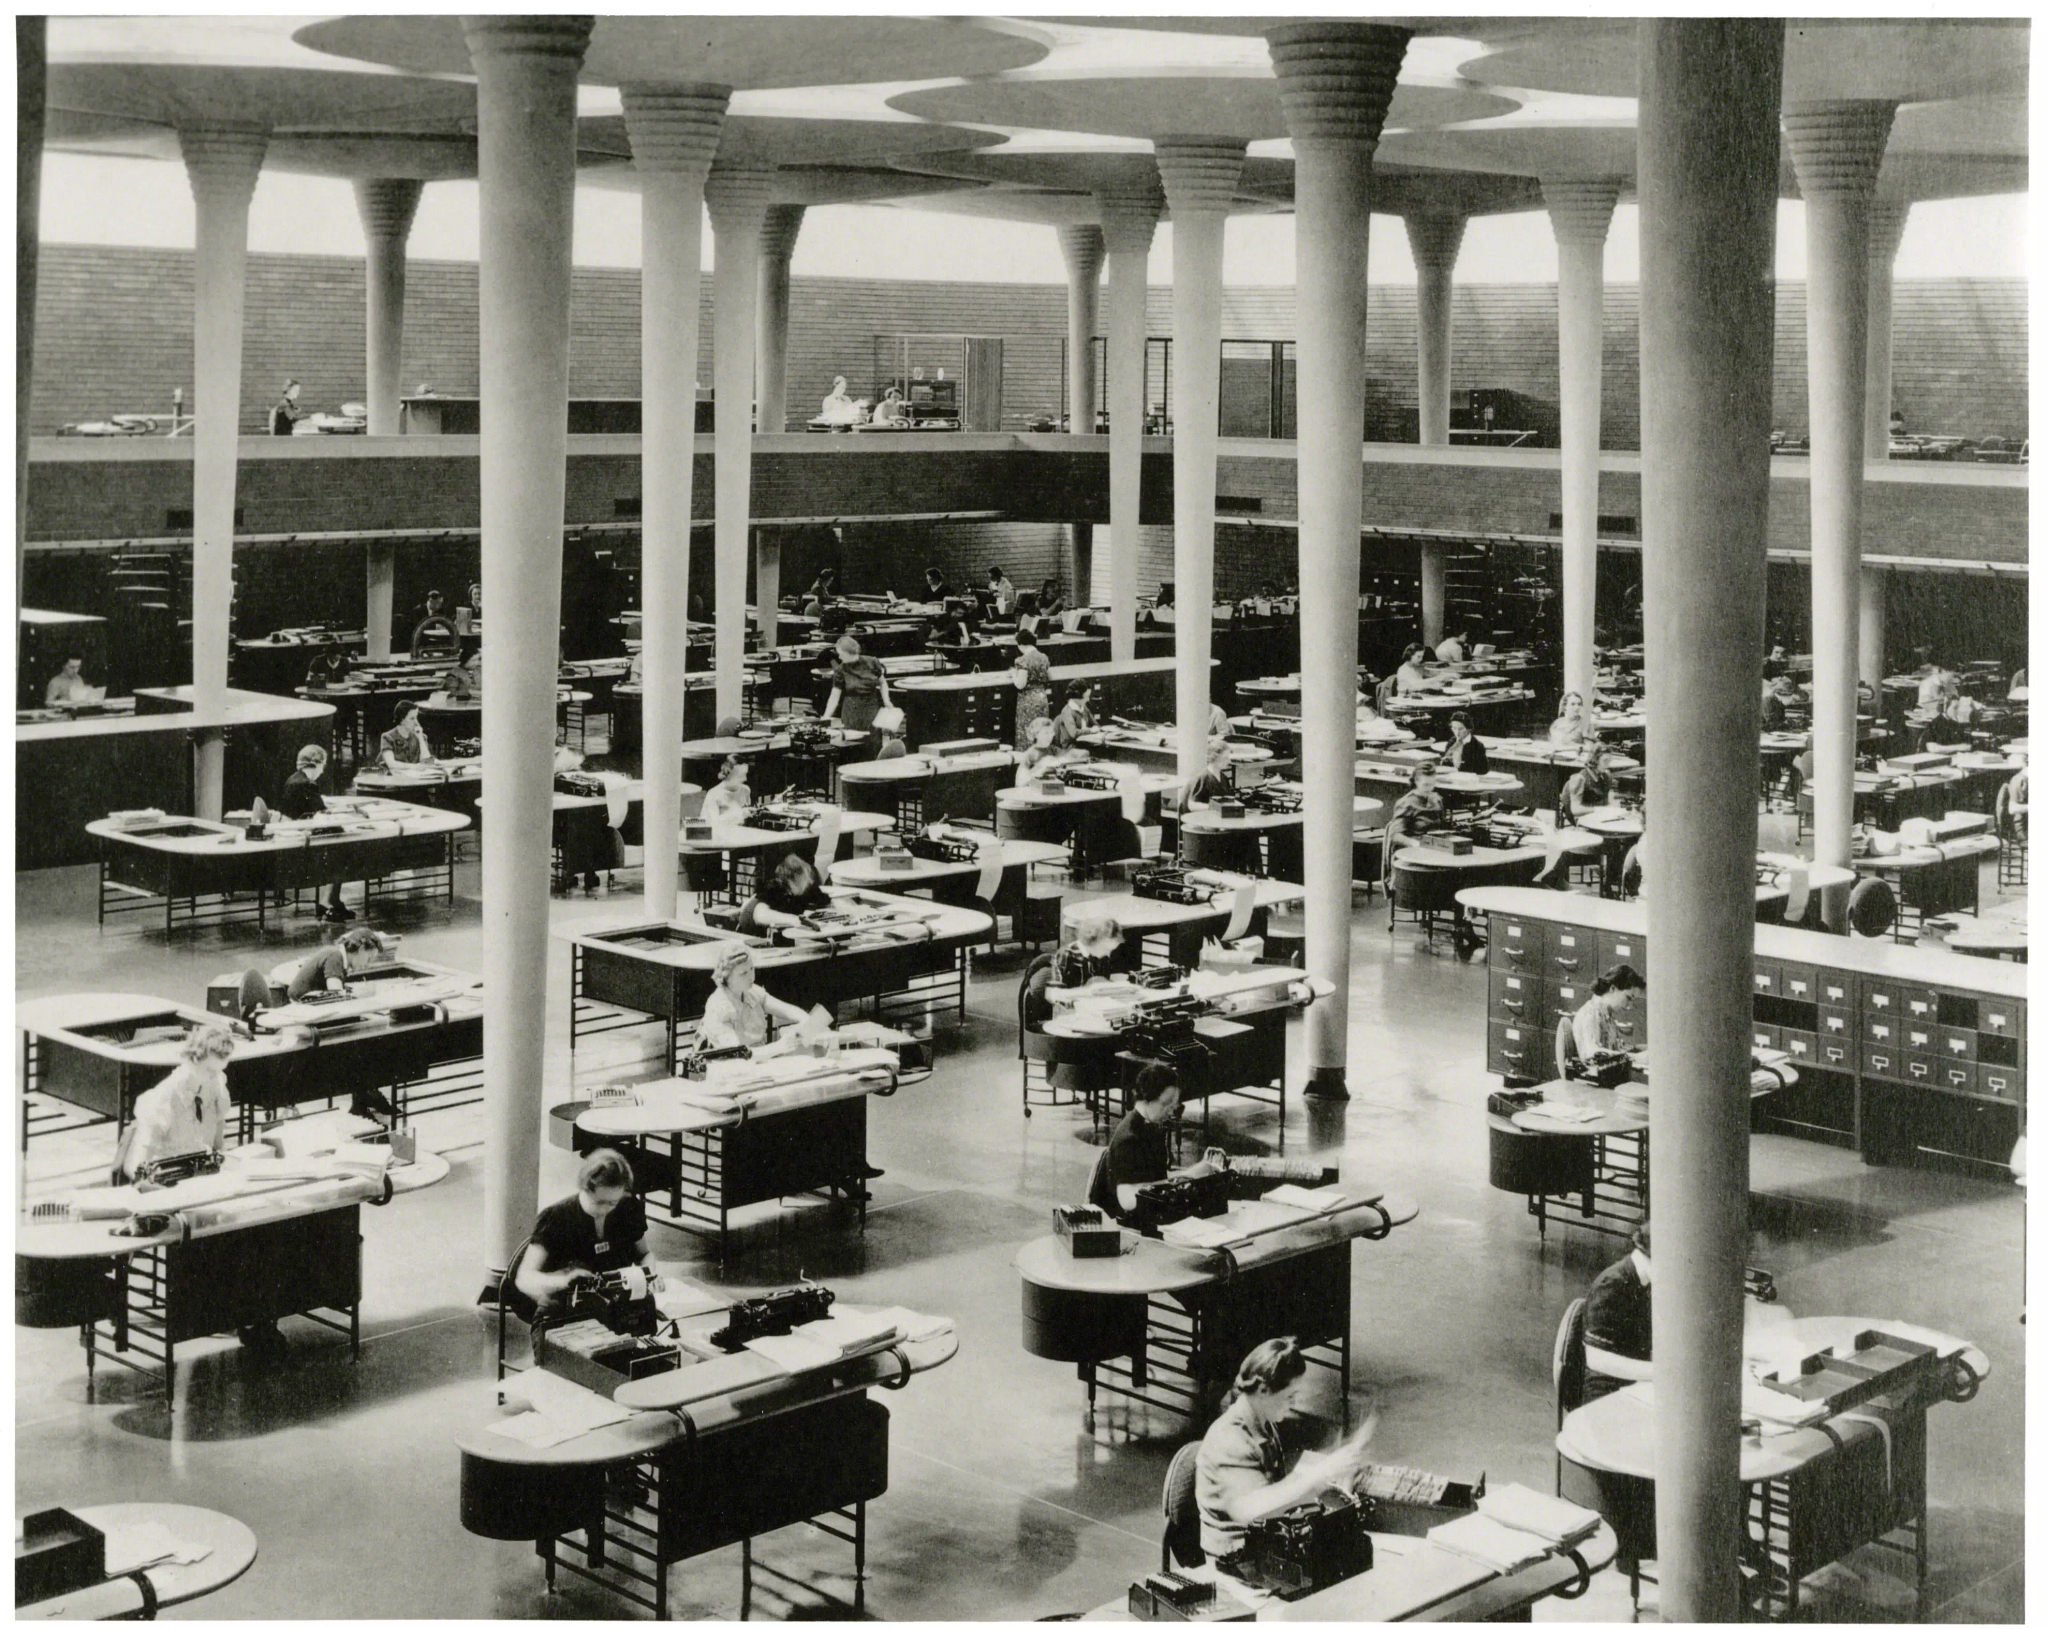 Black and white archive image of steelcase furniture by Frank Lloyd Wright